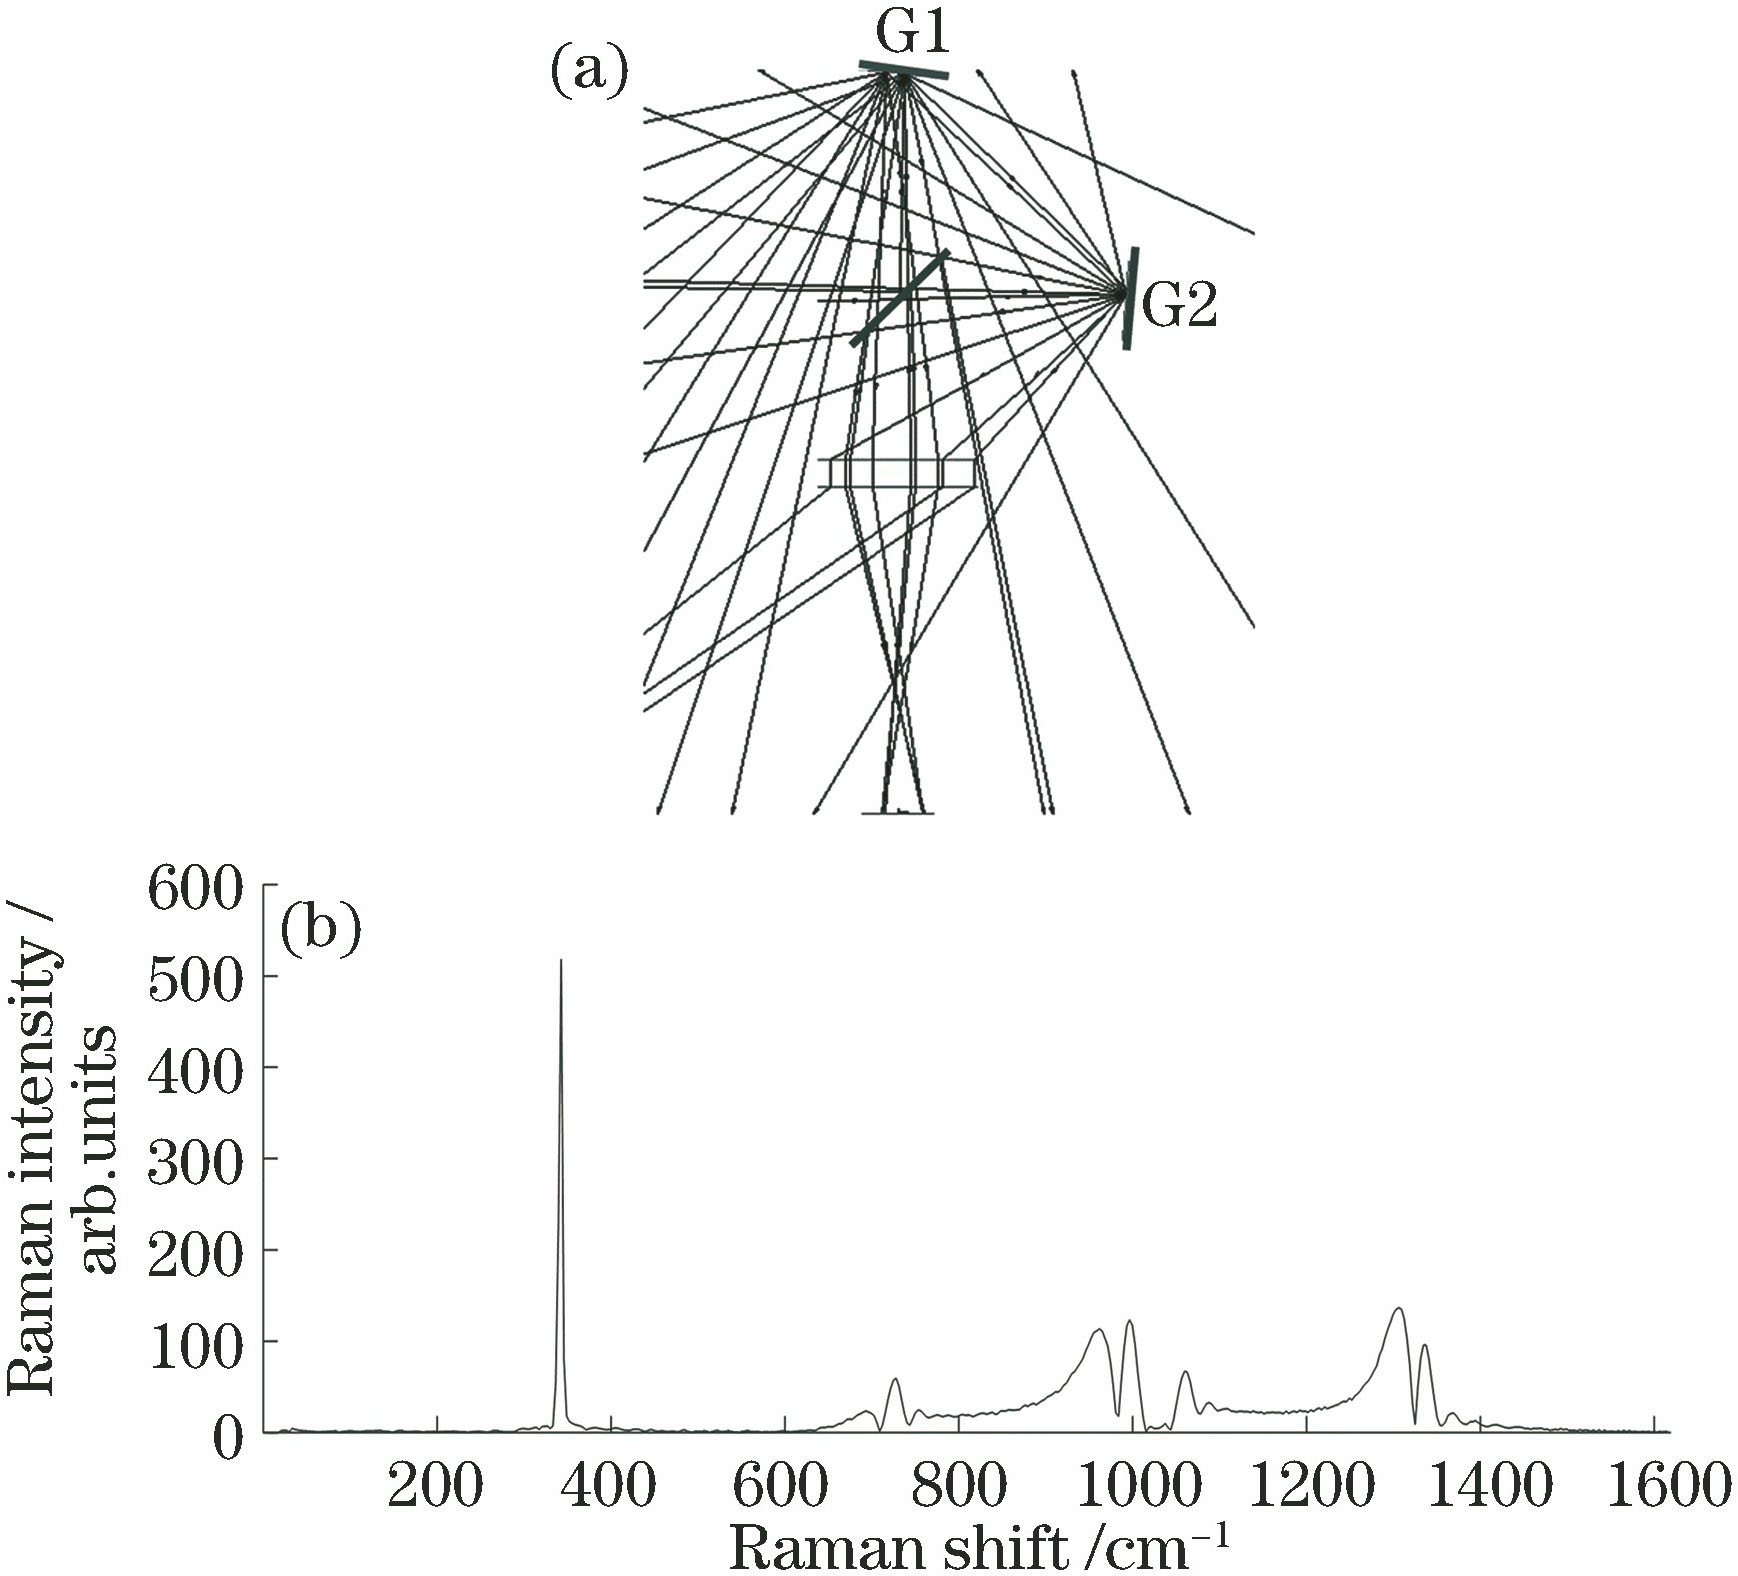 Angular distribution and Raman spectrum. (a) Angular distribution for each diffraction order; (b) Raman spectrum of monochromatic light under multistage diffraction